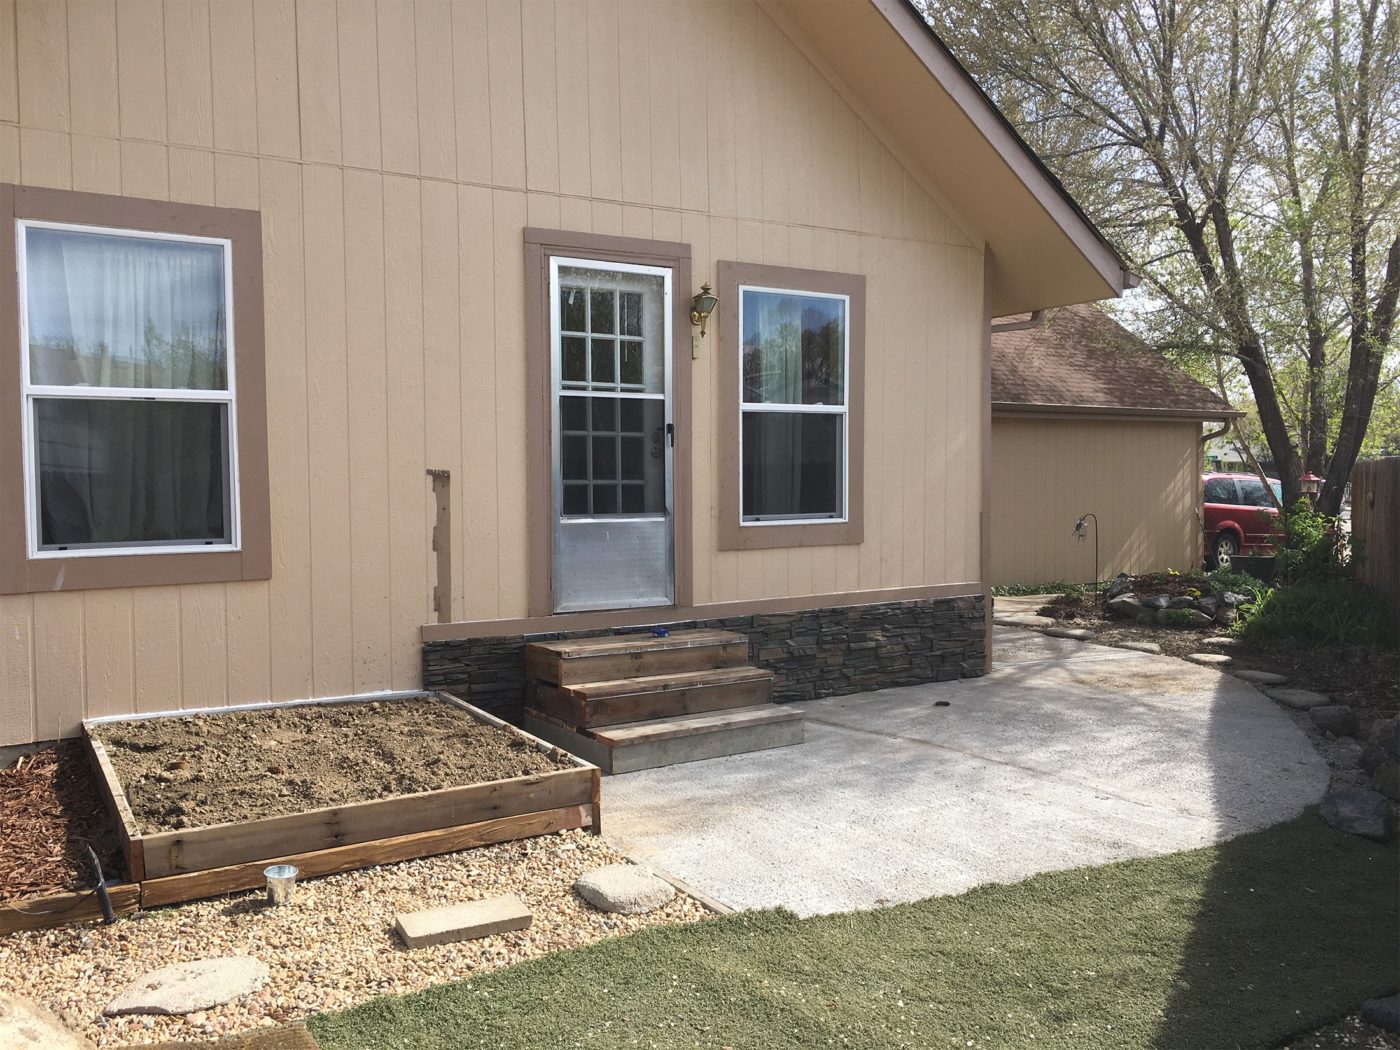 A home foundation project on a manufactured home using Stratford faux stone panels.